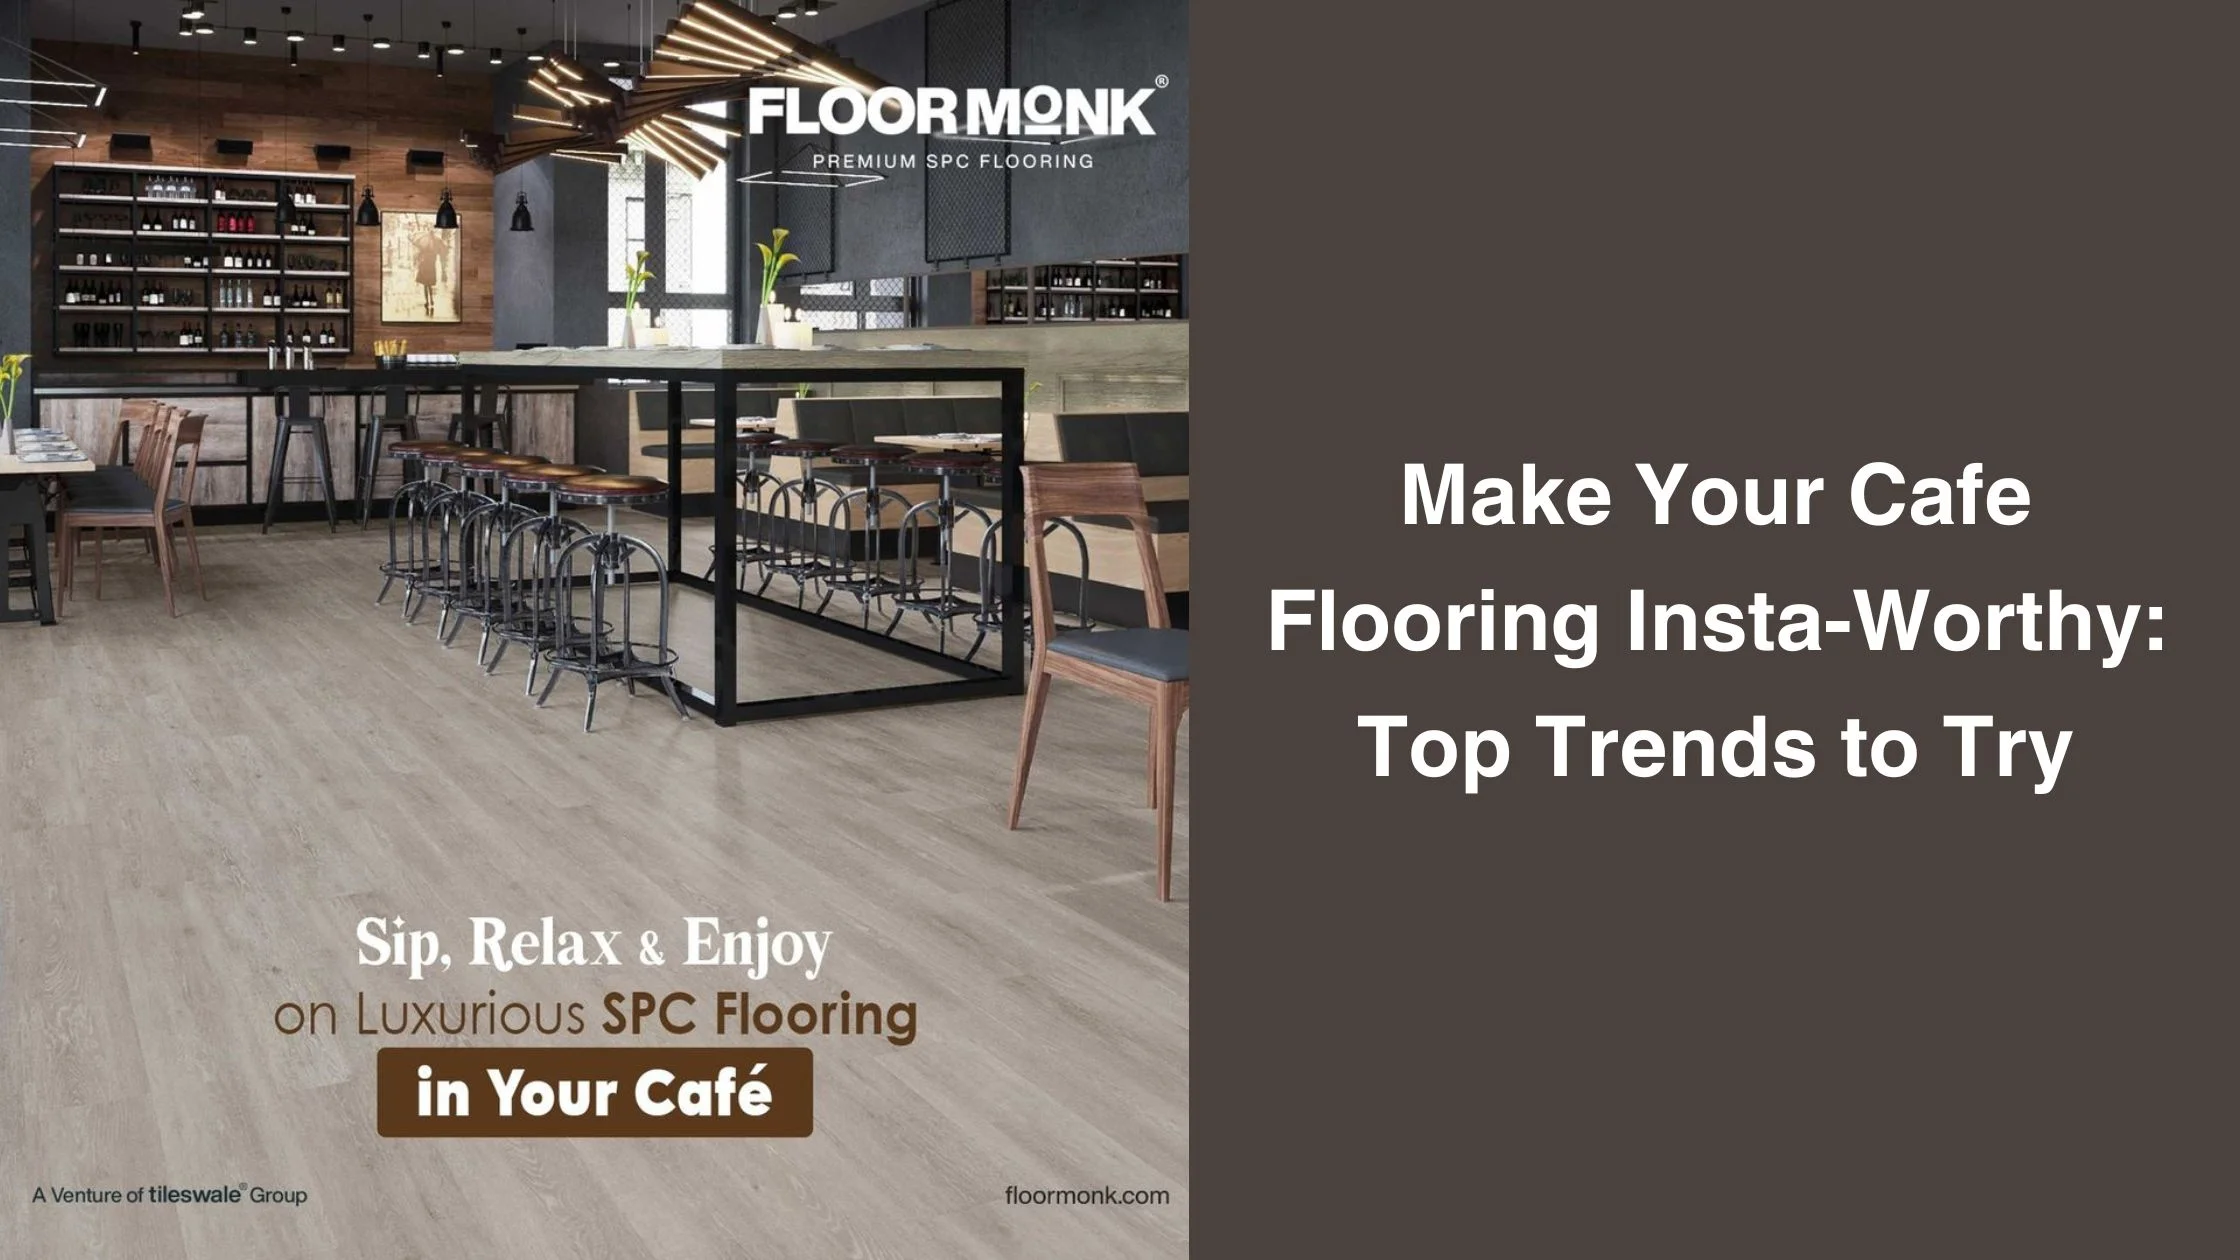 Make Your Cafe Flooring Insta-Worthy: Top Trends To Try